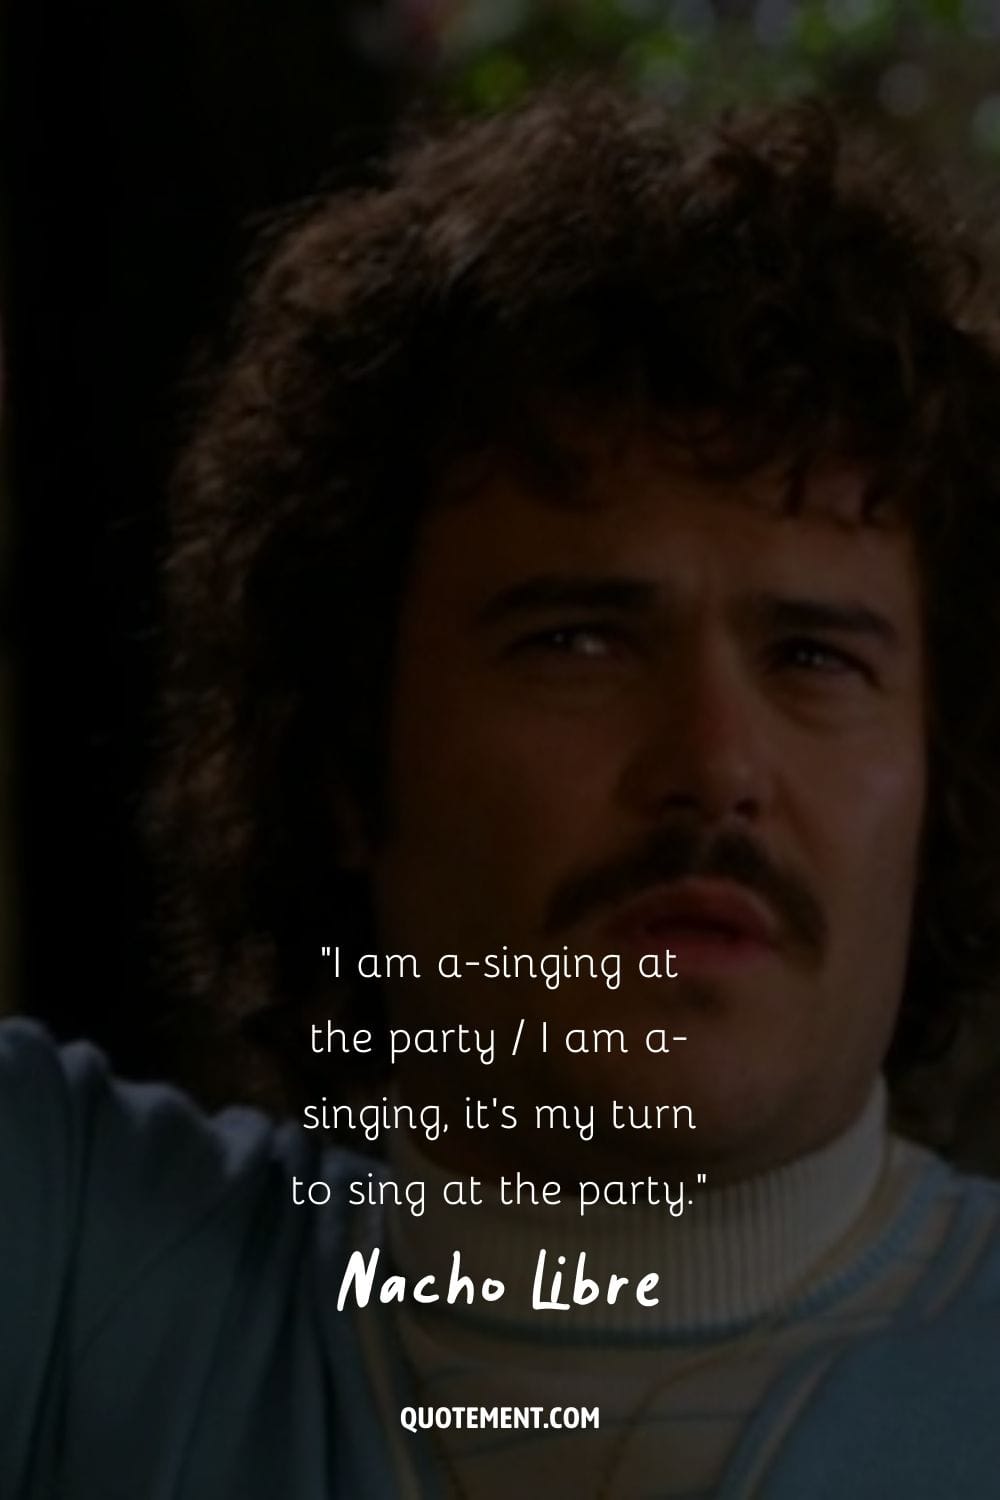 I am a-singing at the party I am a-singing, it's my turn to sing at the party.